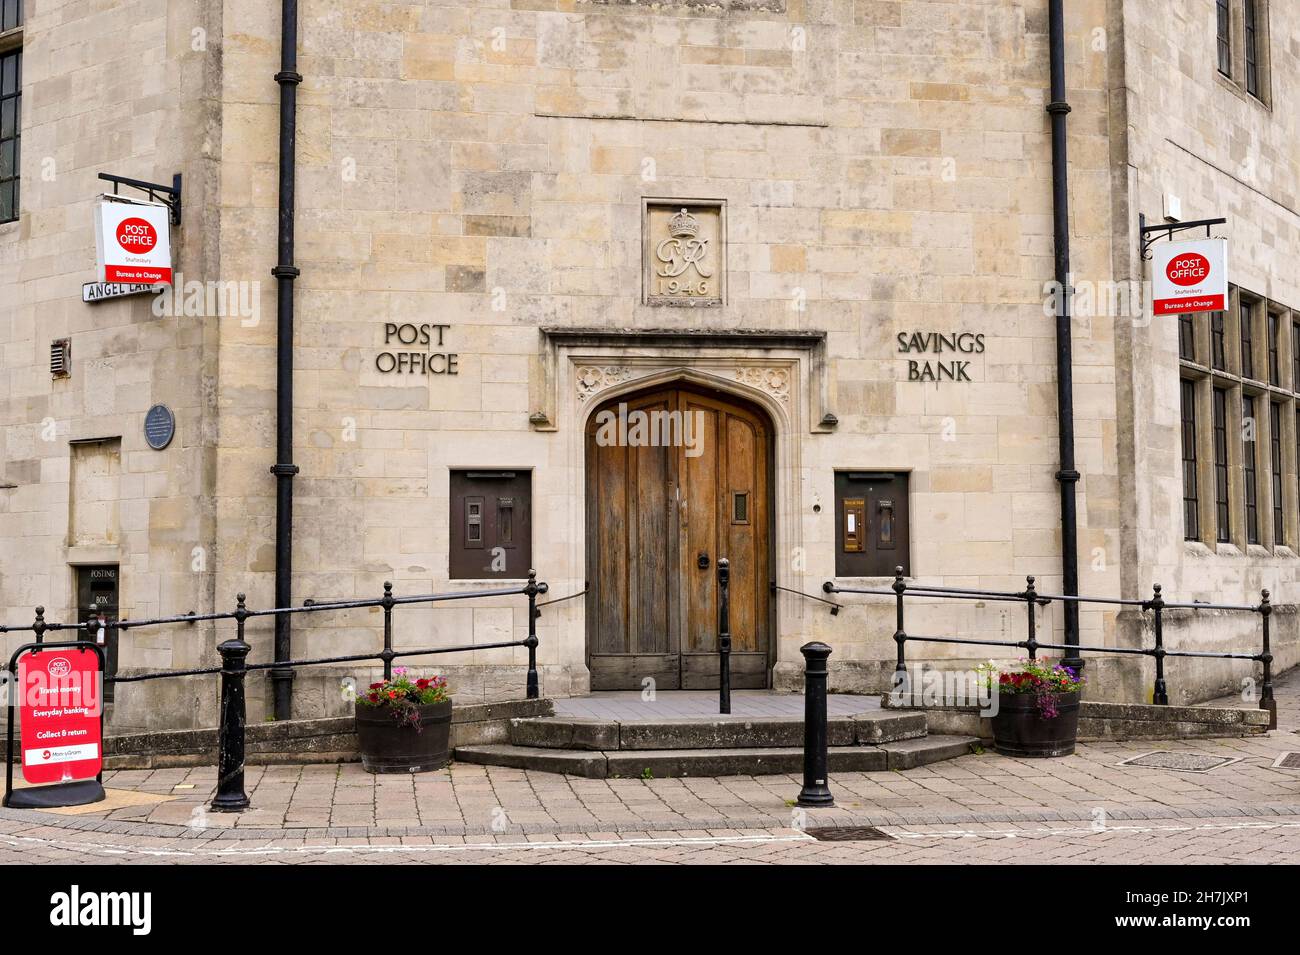 Shaftsbury, England - June 2021: Exterior view of the entrance to the old post office in the town cenre Stock Photo